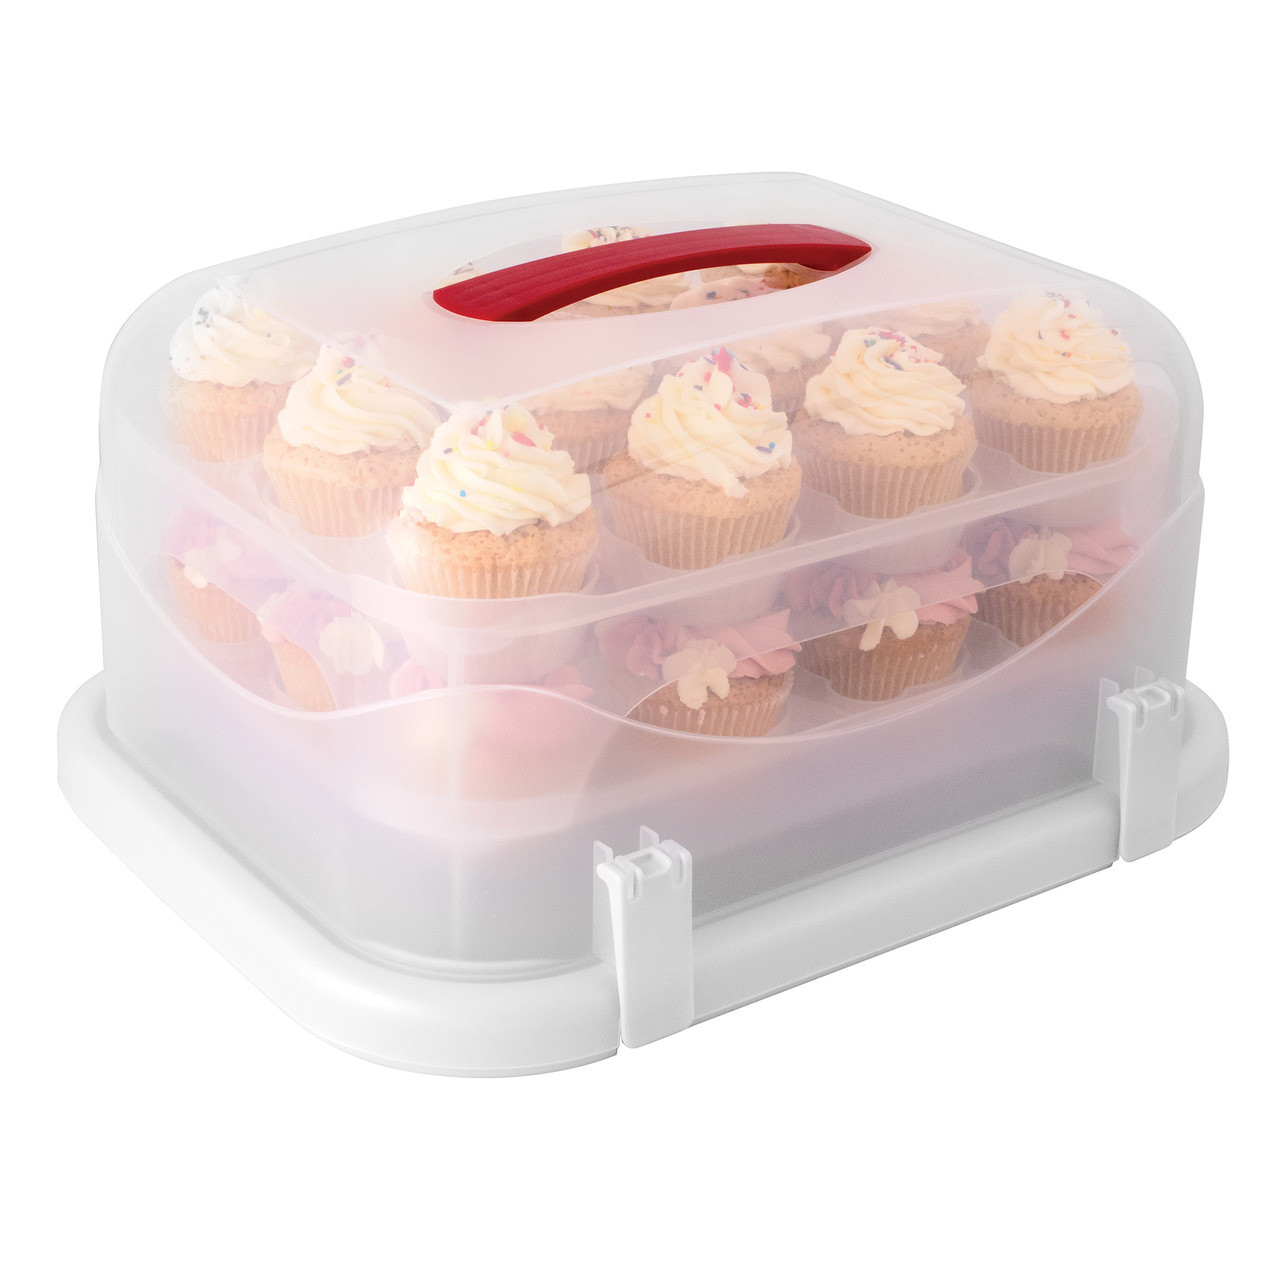 Cakes and Cupcakes Carrier